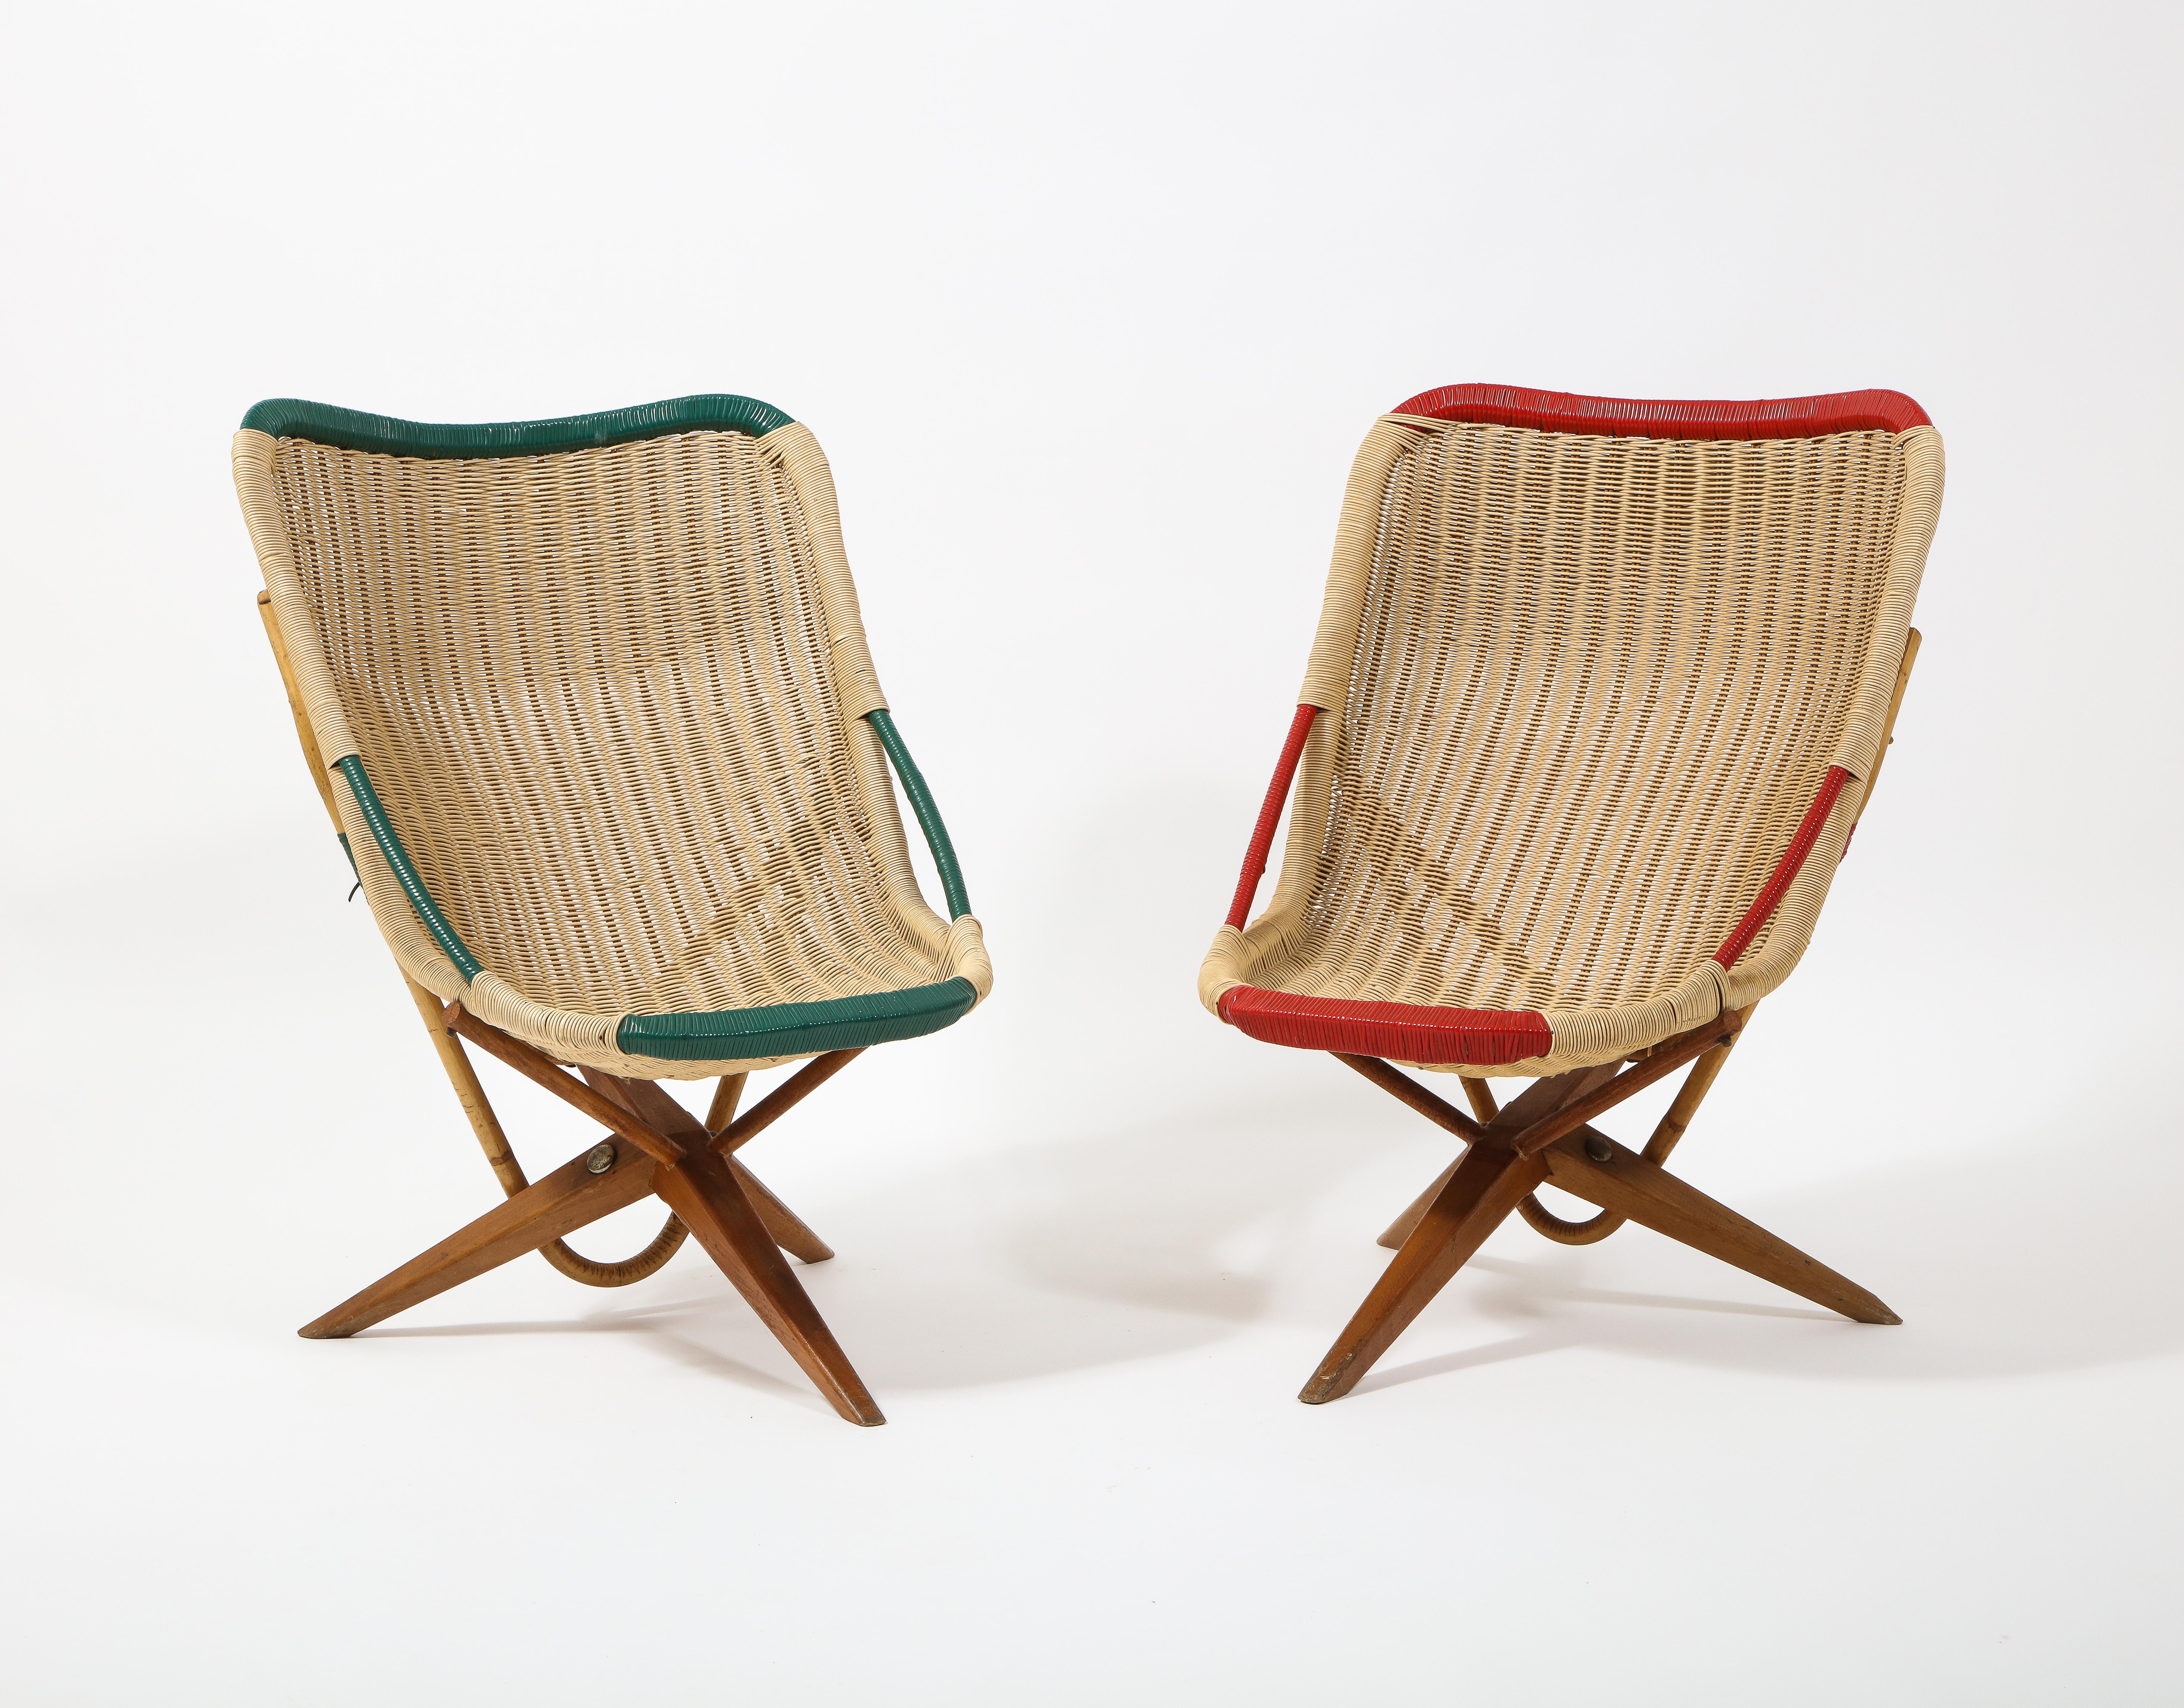 Pair of Chistera Rattan chairs on tripod legs, the design reminiscent of Motte famous version, not sure which came first but we've never seen those before.